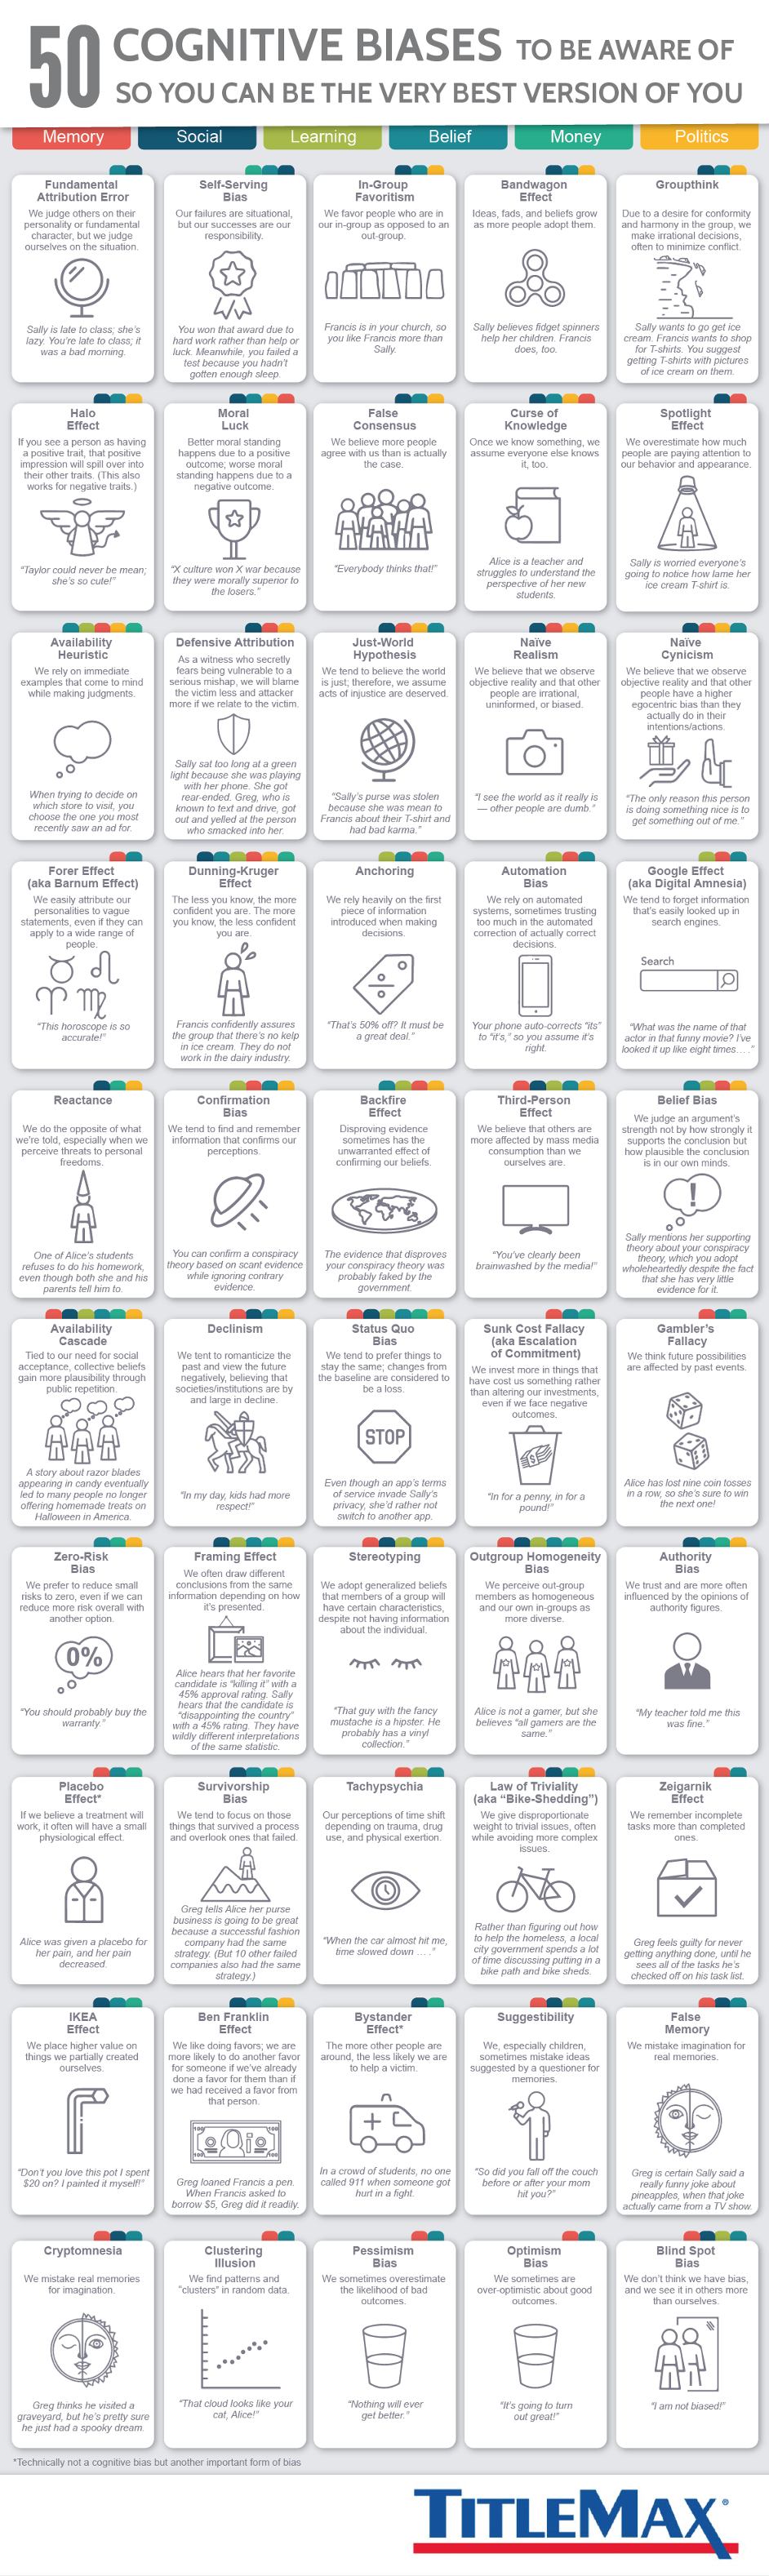 50 Cognitive Biases Infographic